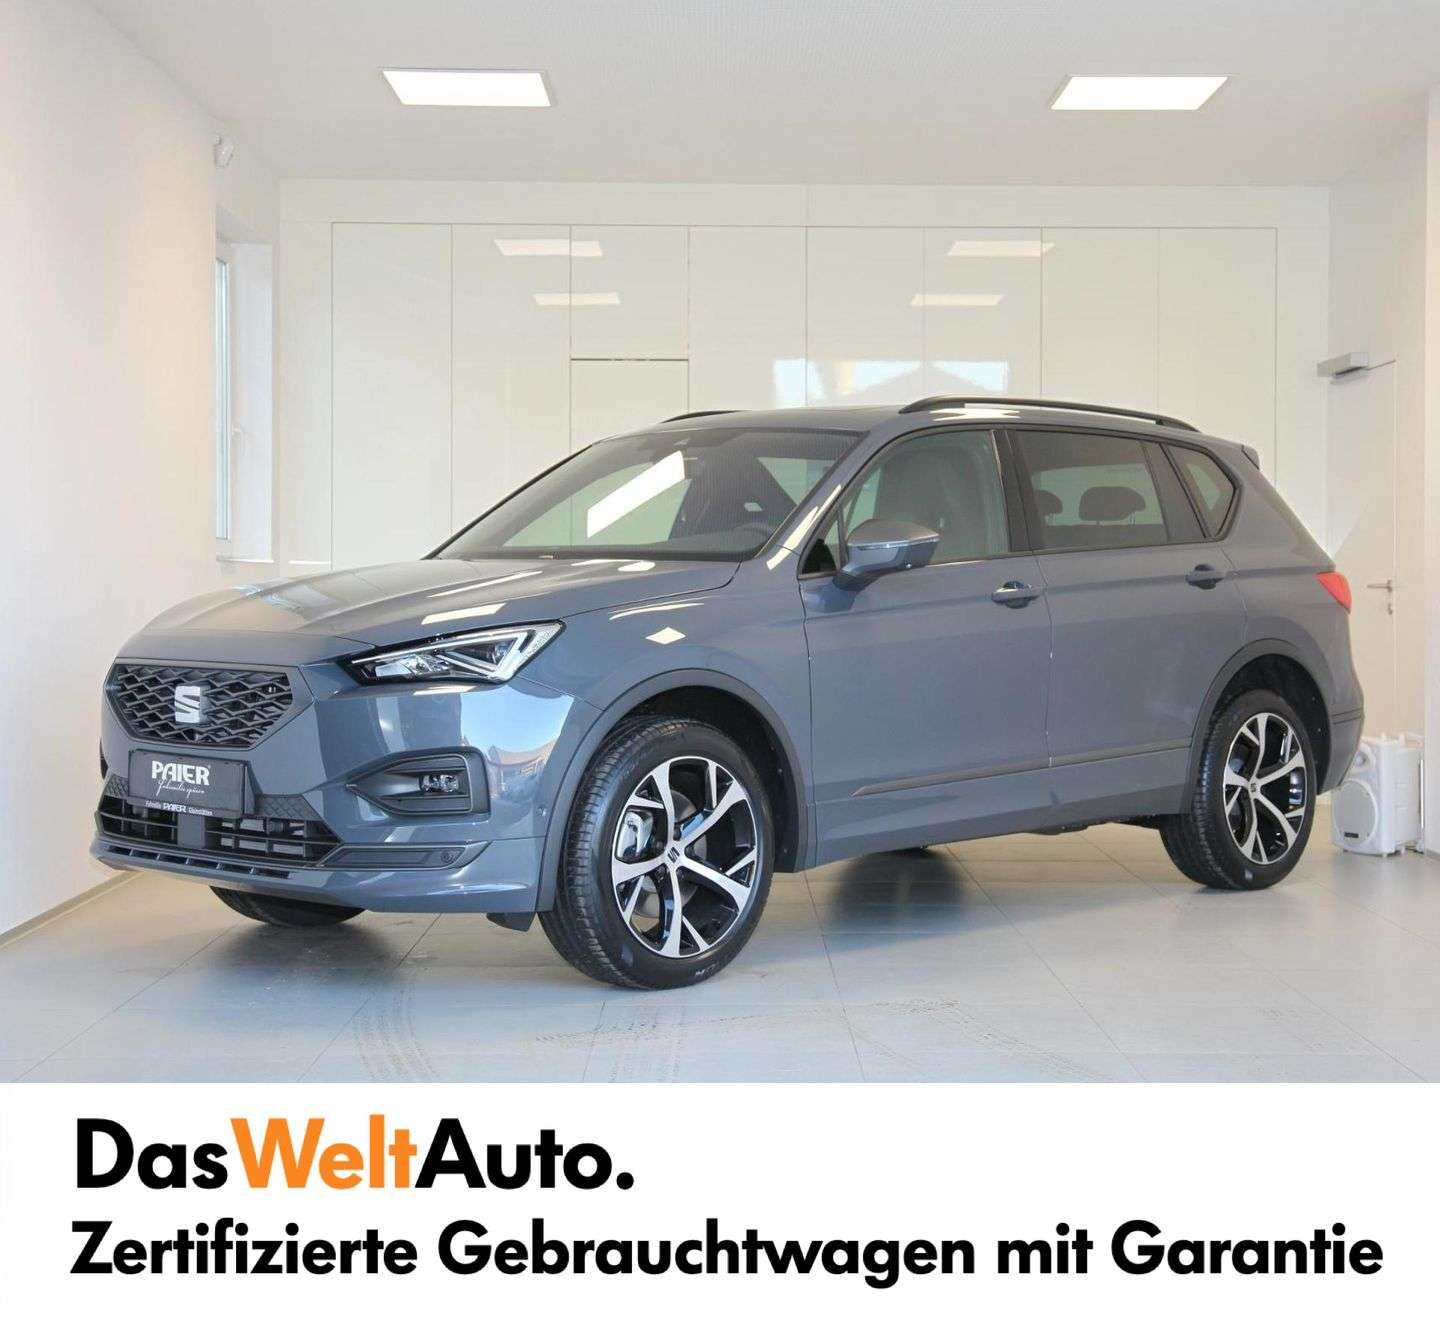 SEAT Tarraco Off-Road/Pick-up in Grey used in Gleinstätten for € 57,990.-